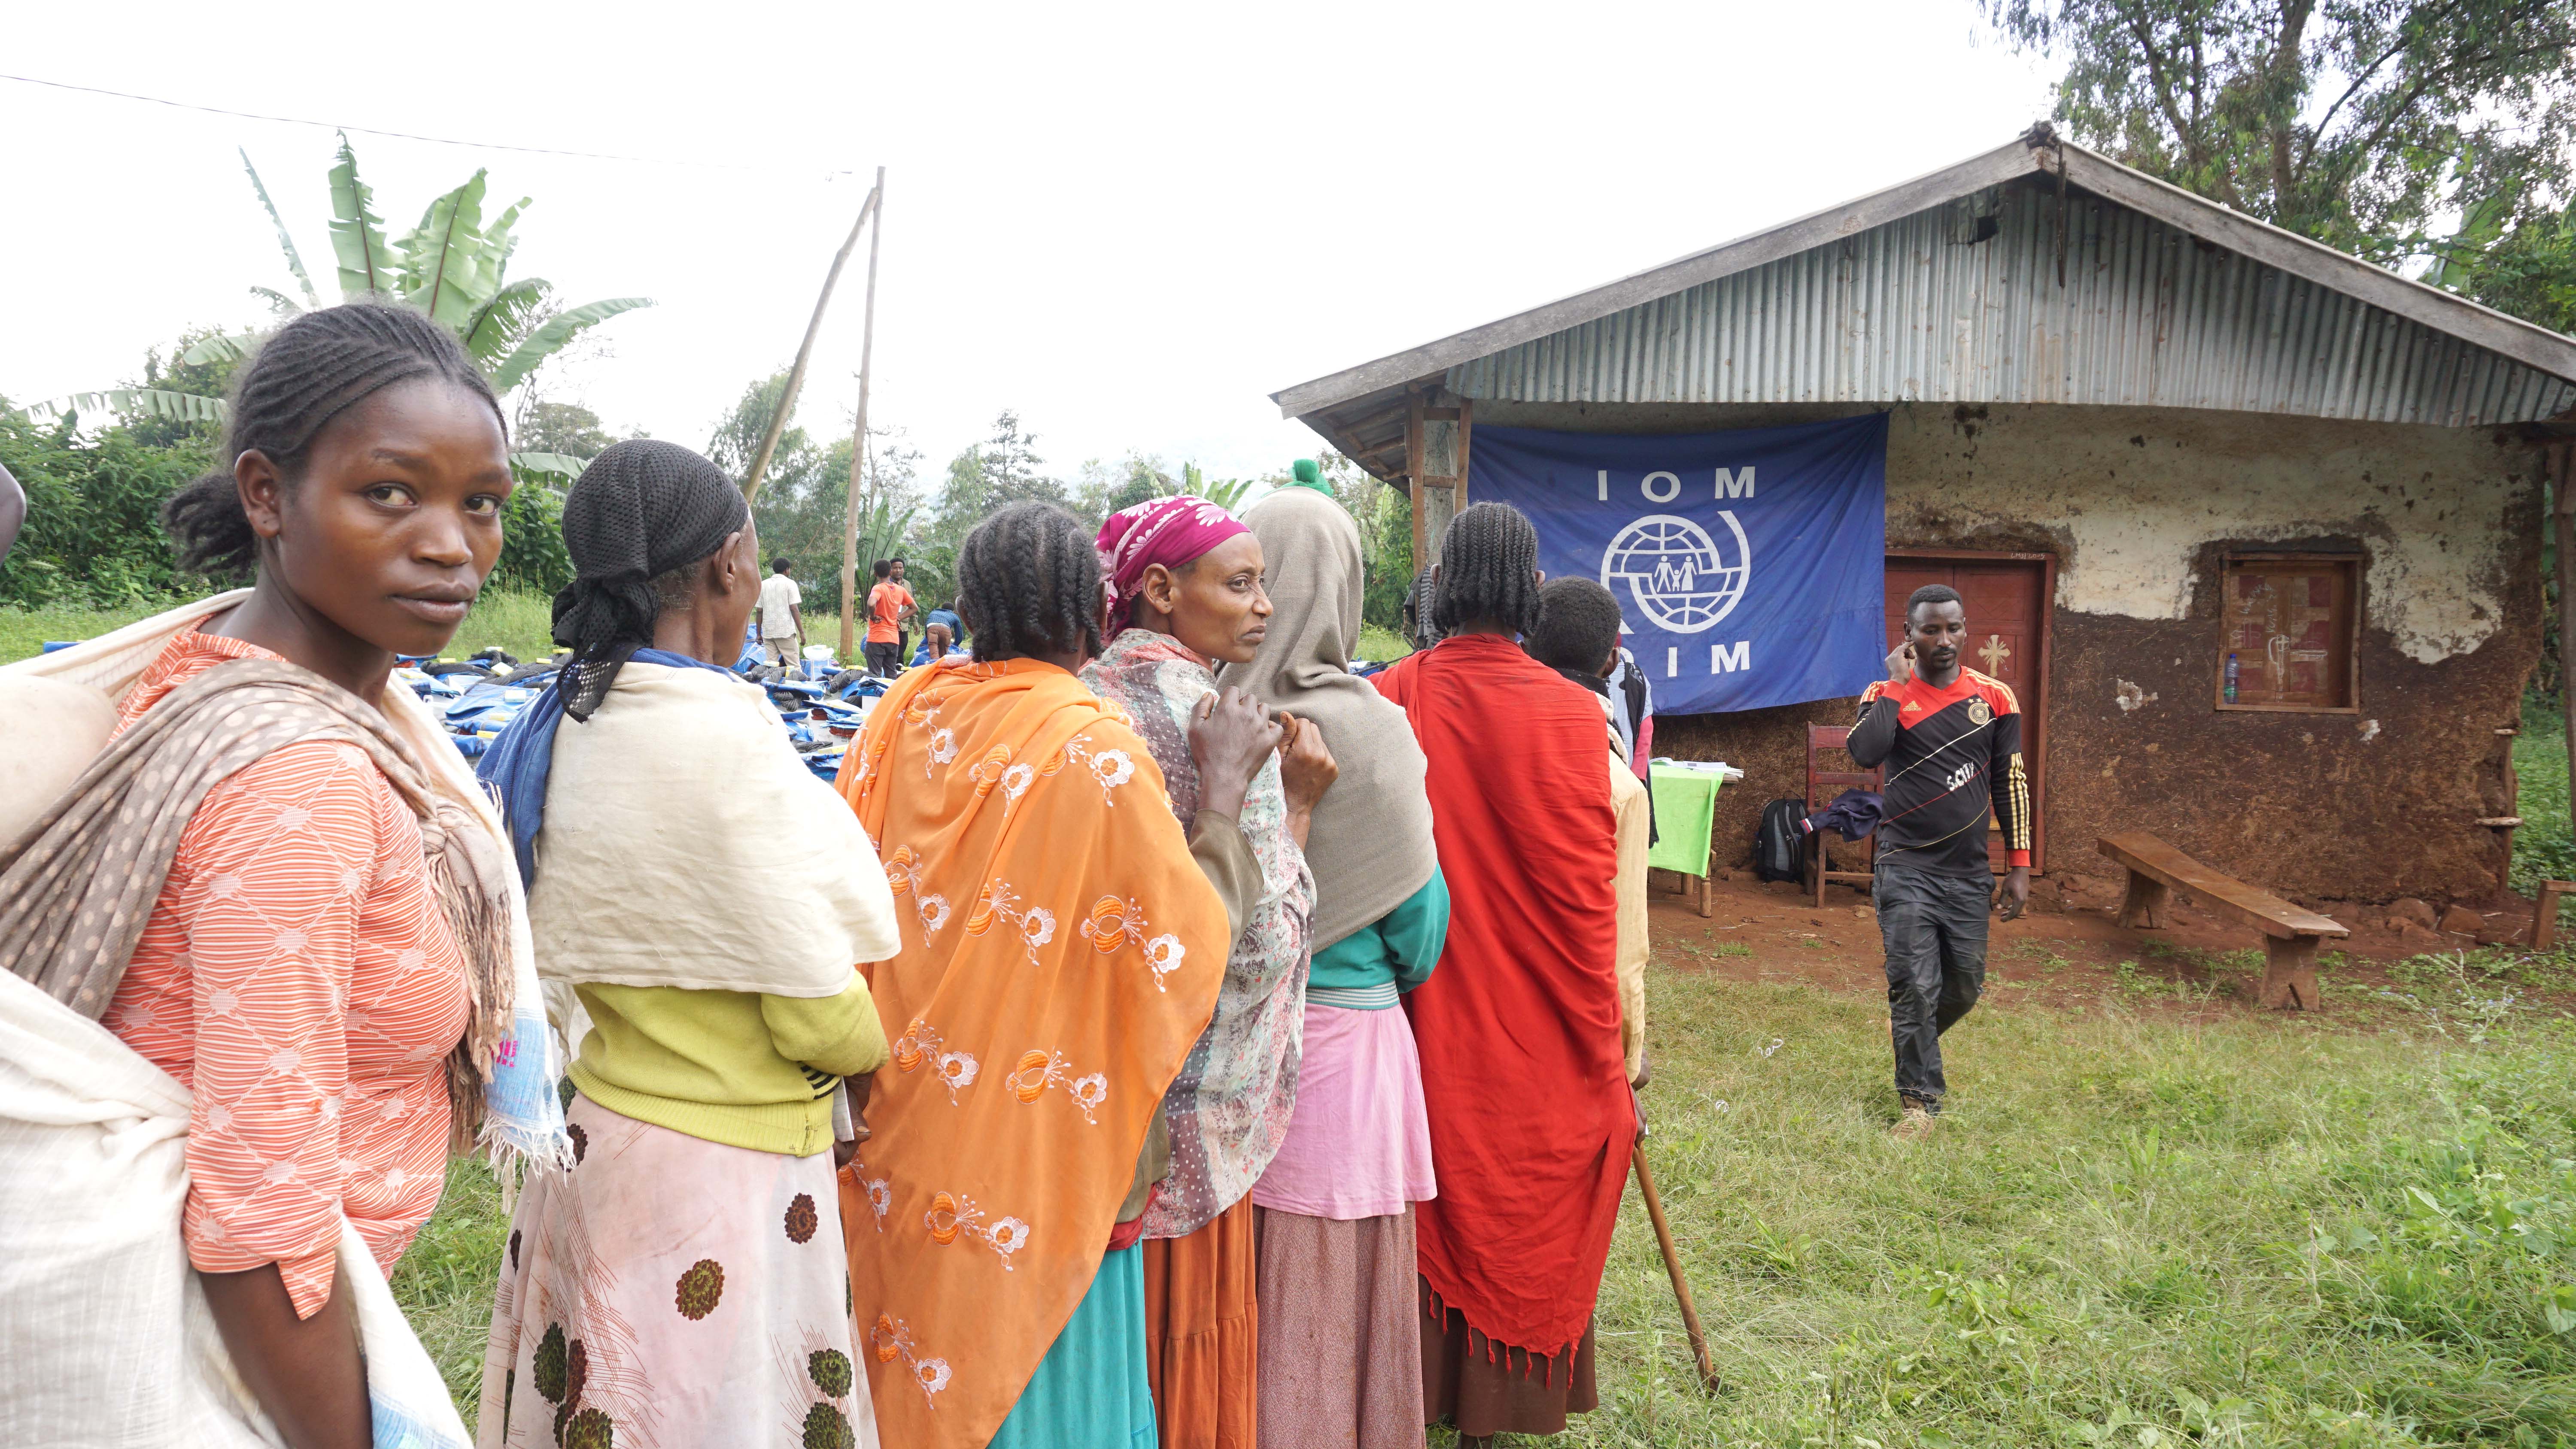 Women wait in line for help from IOM, Ethiopia